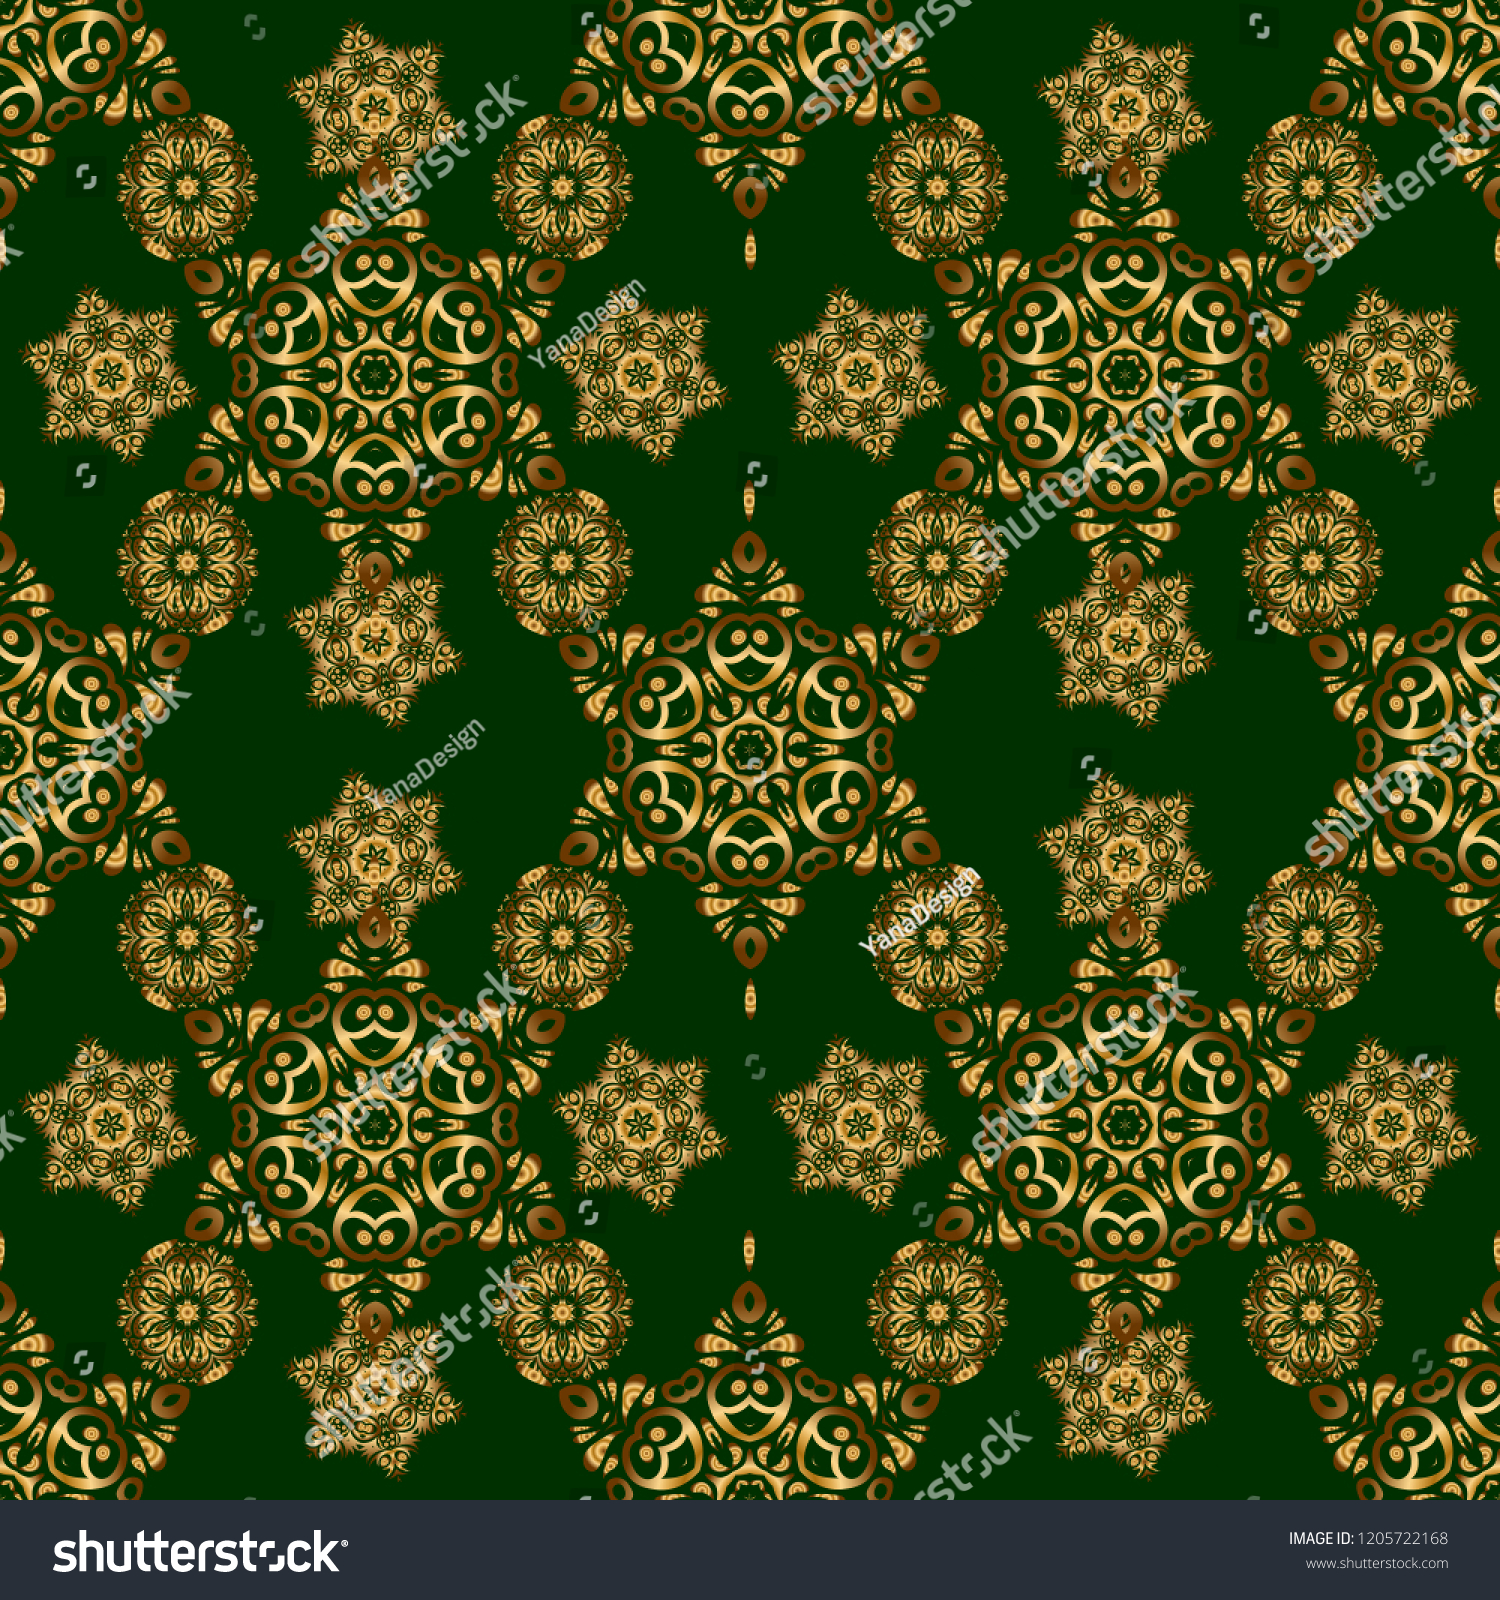 Golden Glitter Snowflakes On Green Background Stock Vector Royalty Free